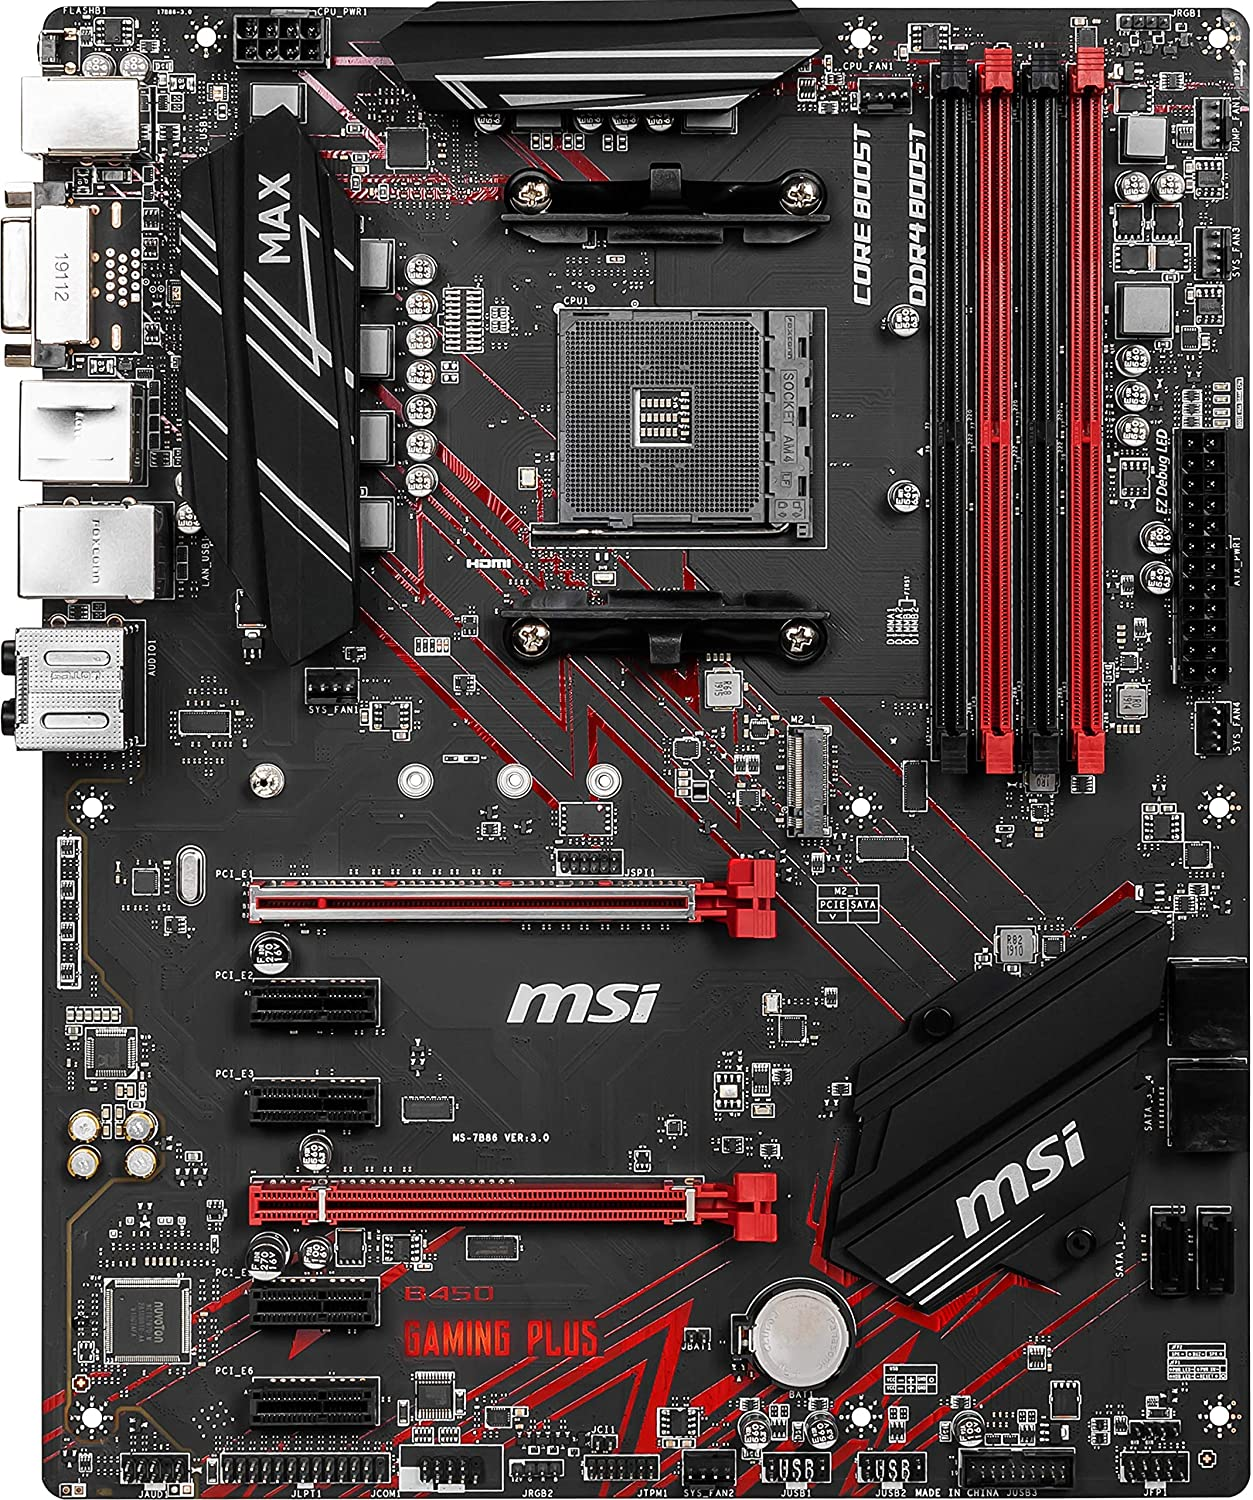 MSI Motherboard with highlighted RAM slots